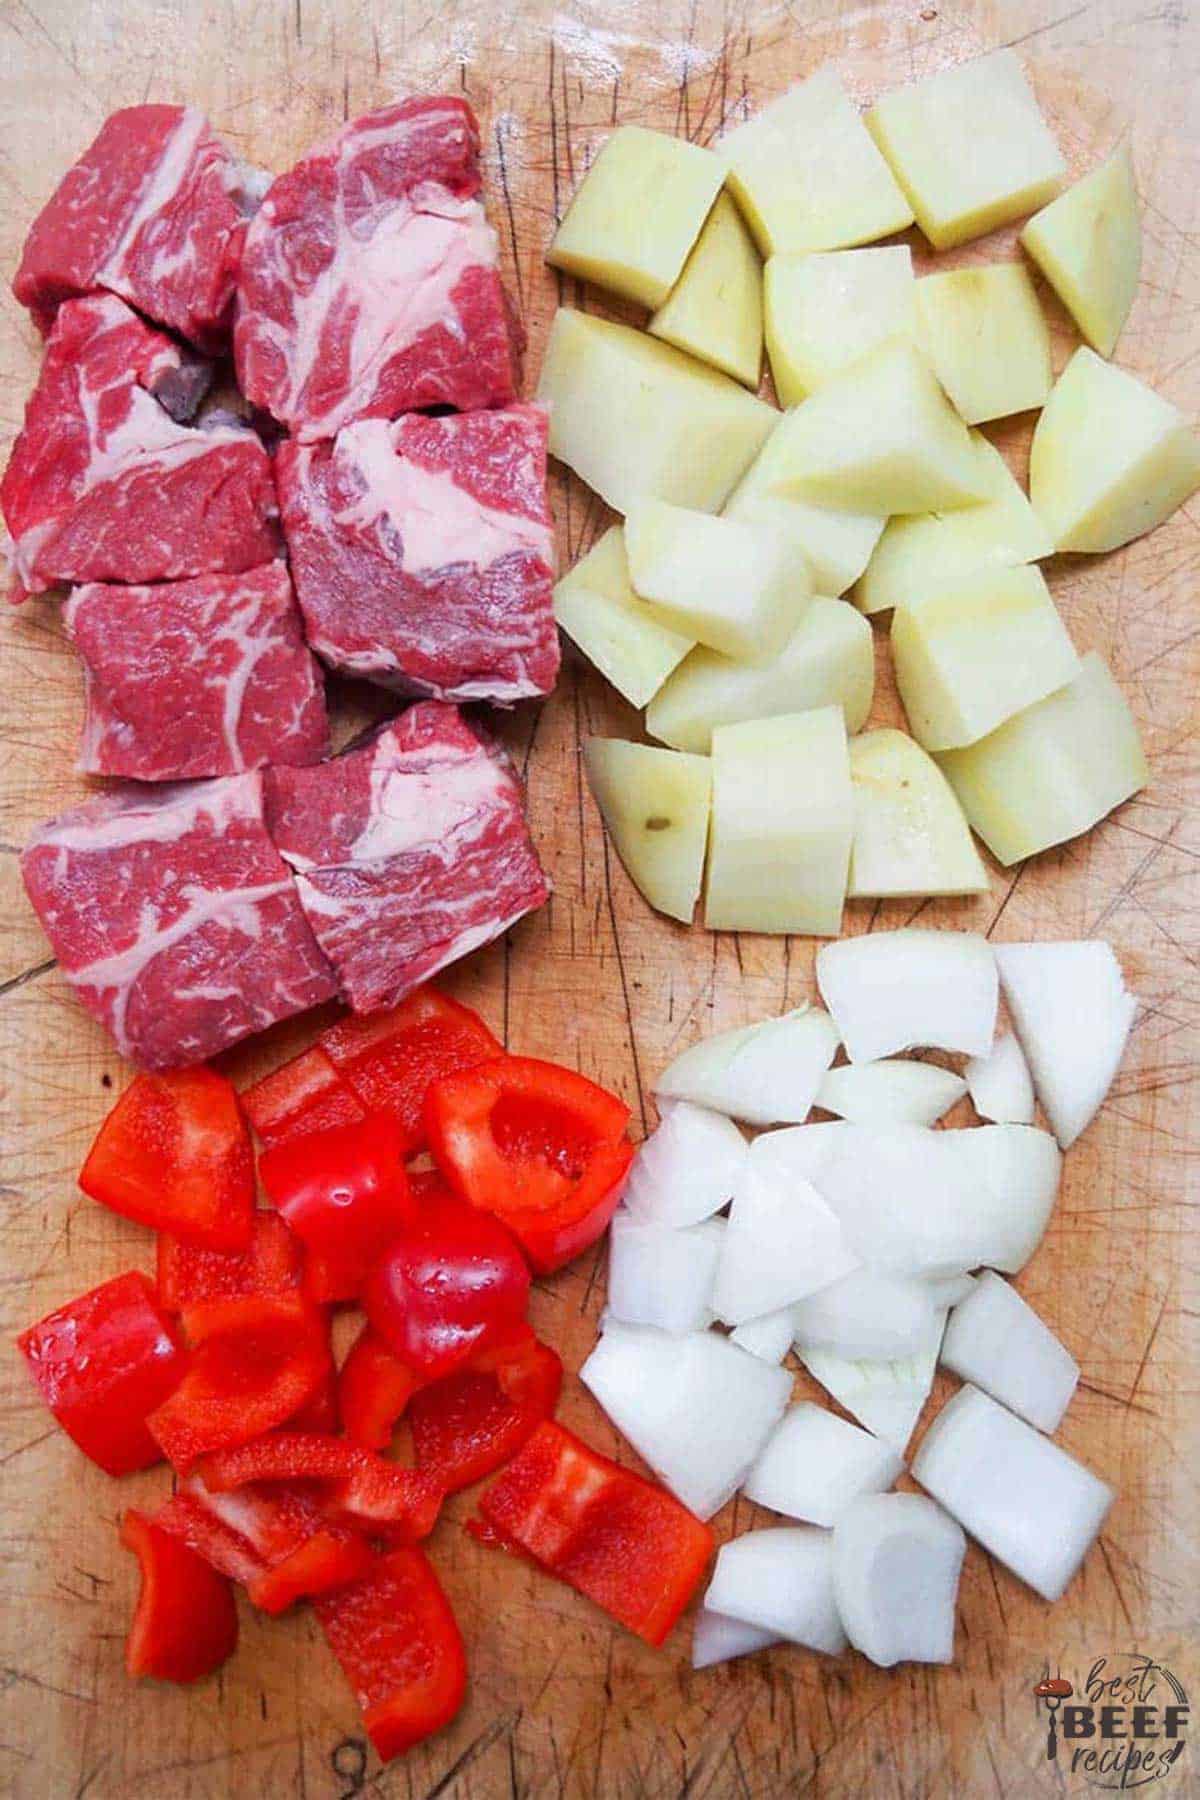 Diced steak, potatoes, peppers, and onions on a cutting board